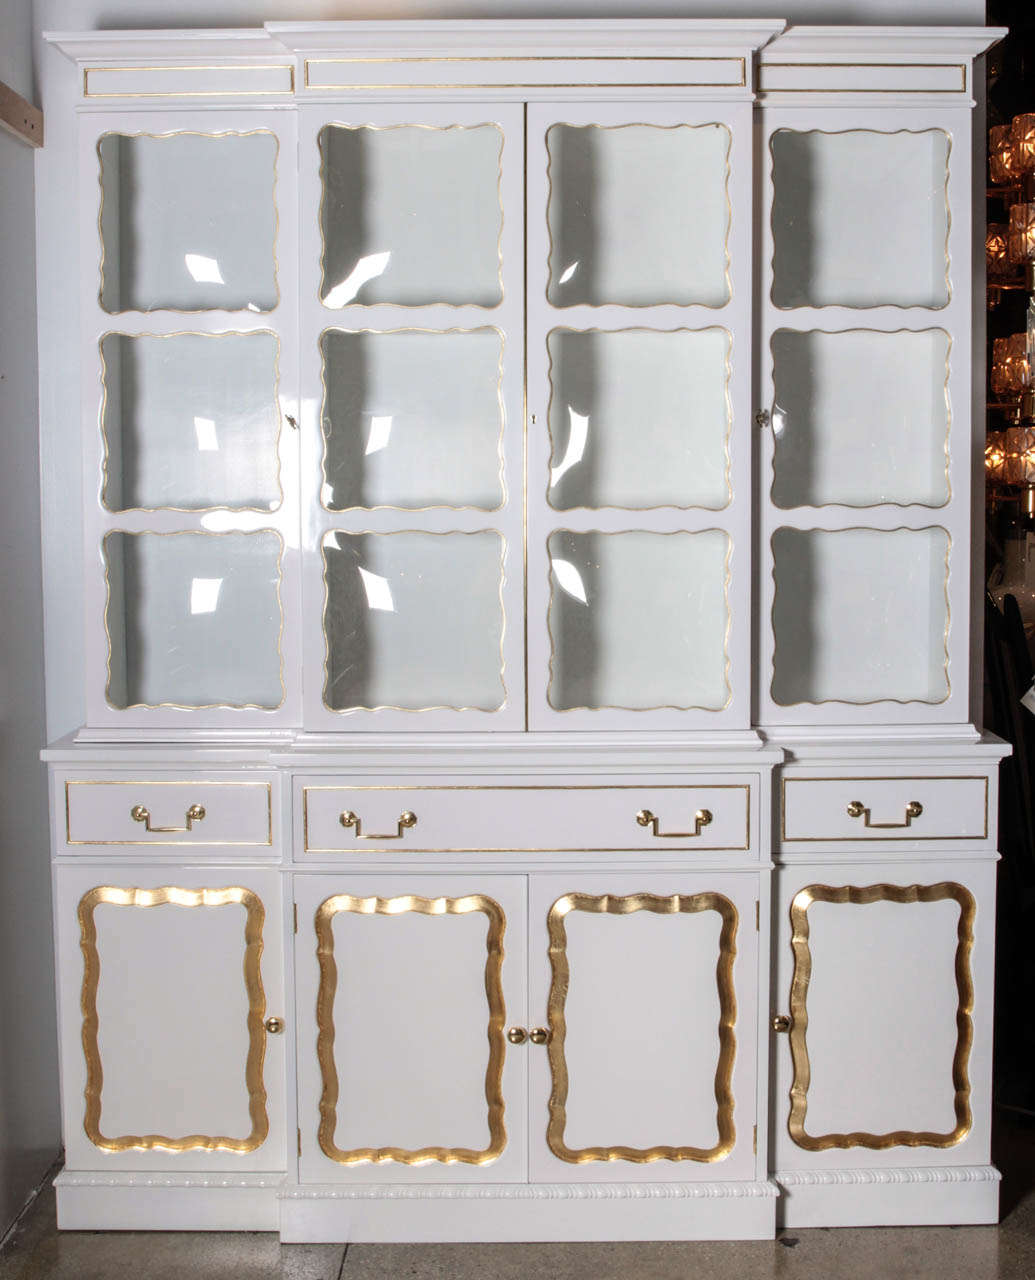 Ultra Glam Hollywood Regency white lacquer bookcase/breakfront with carved and 22kt gold leafed trim.The  Middle section folds down to reveal a secretary compartment and writing surface. Upper case features gilded trimmed convex glass window panes.